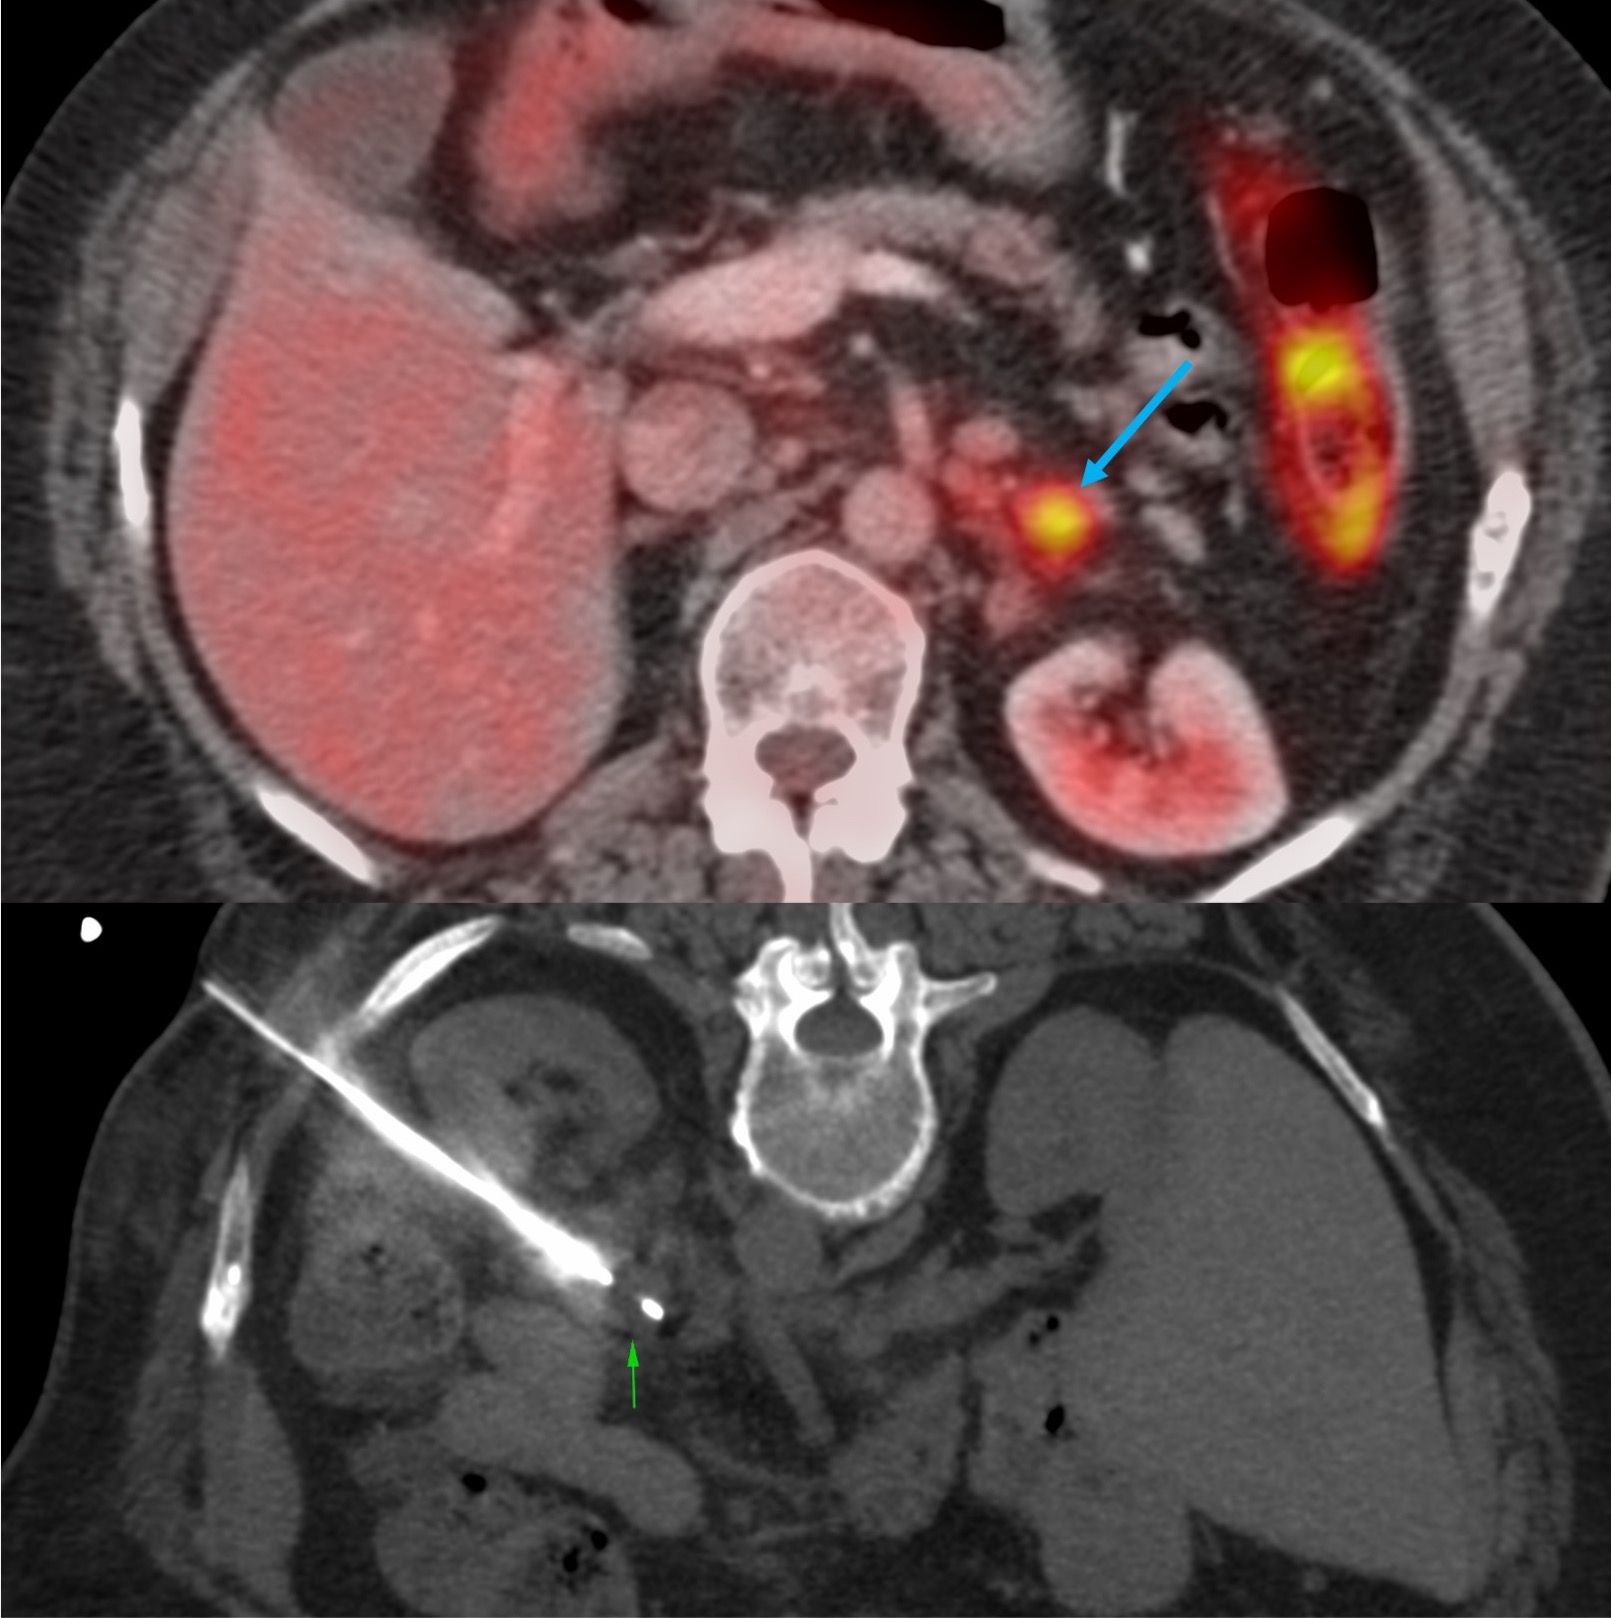 Case 22: 70-Years Lady with a Left Adrenal Nodule - Prone Posterolateral Approach